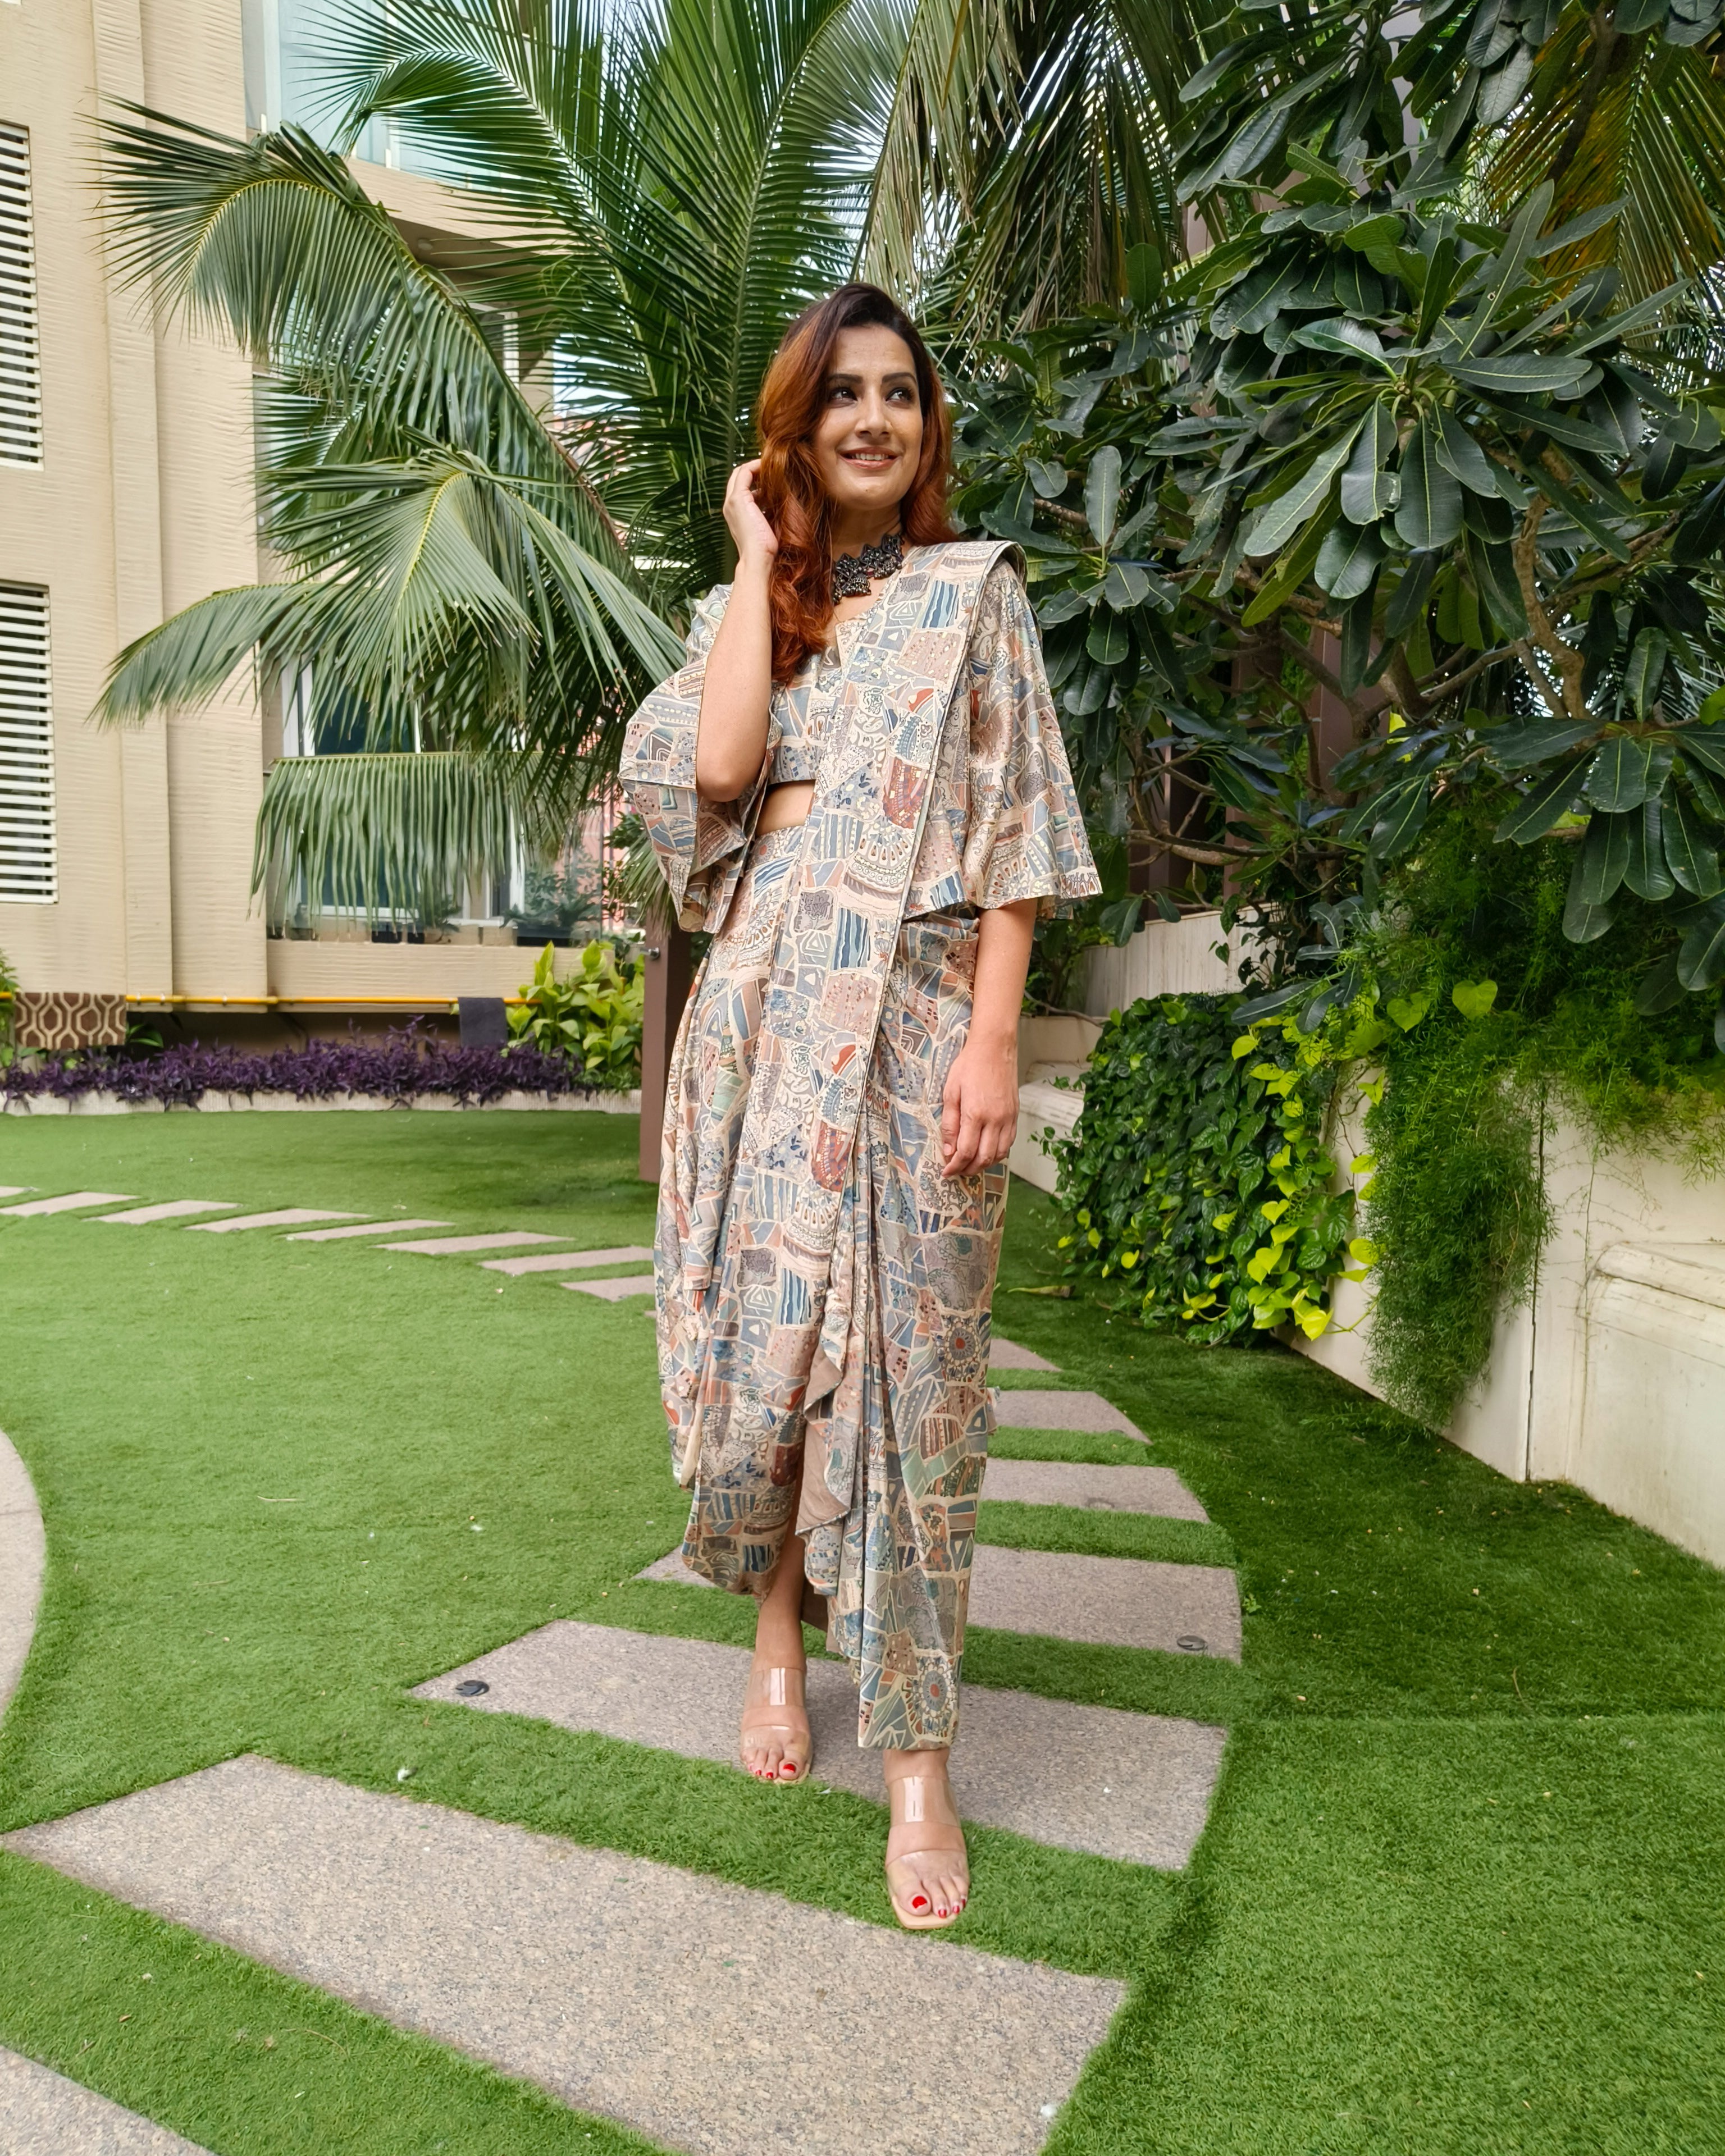 PEACH KHAKHEE ABSTRACT PRINTED SAREE SKIRT WITH BLOUSE AND FLARED JACKET